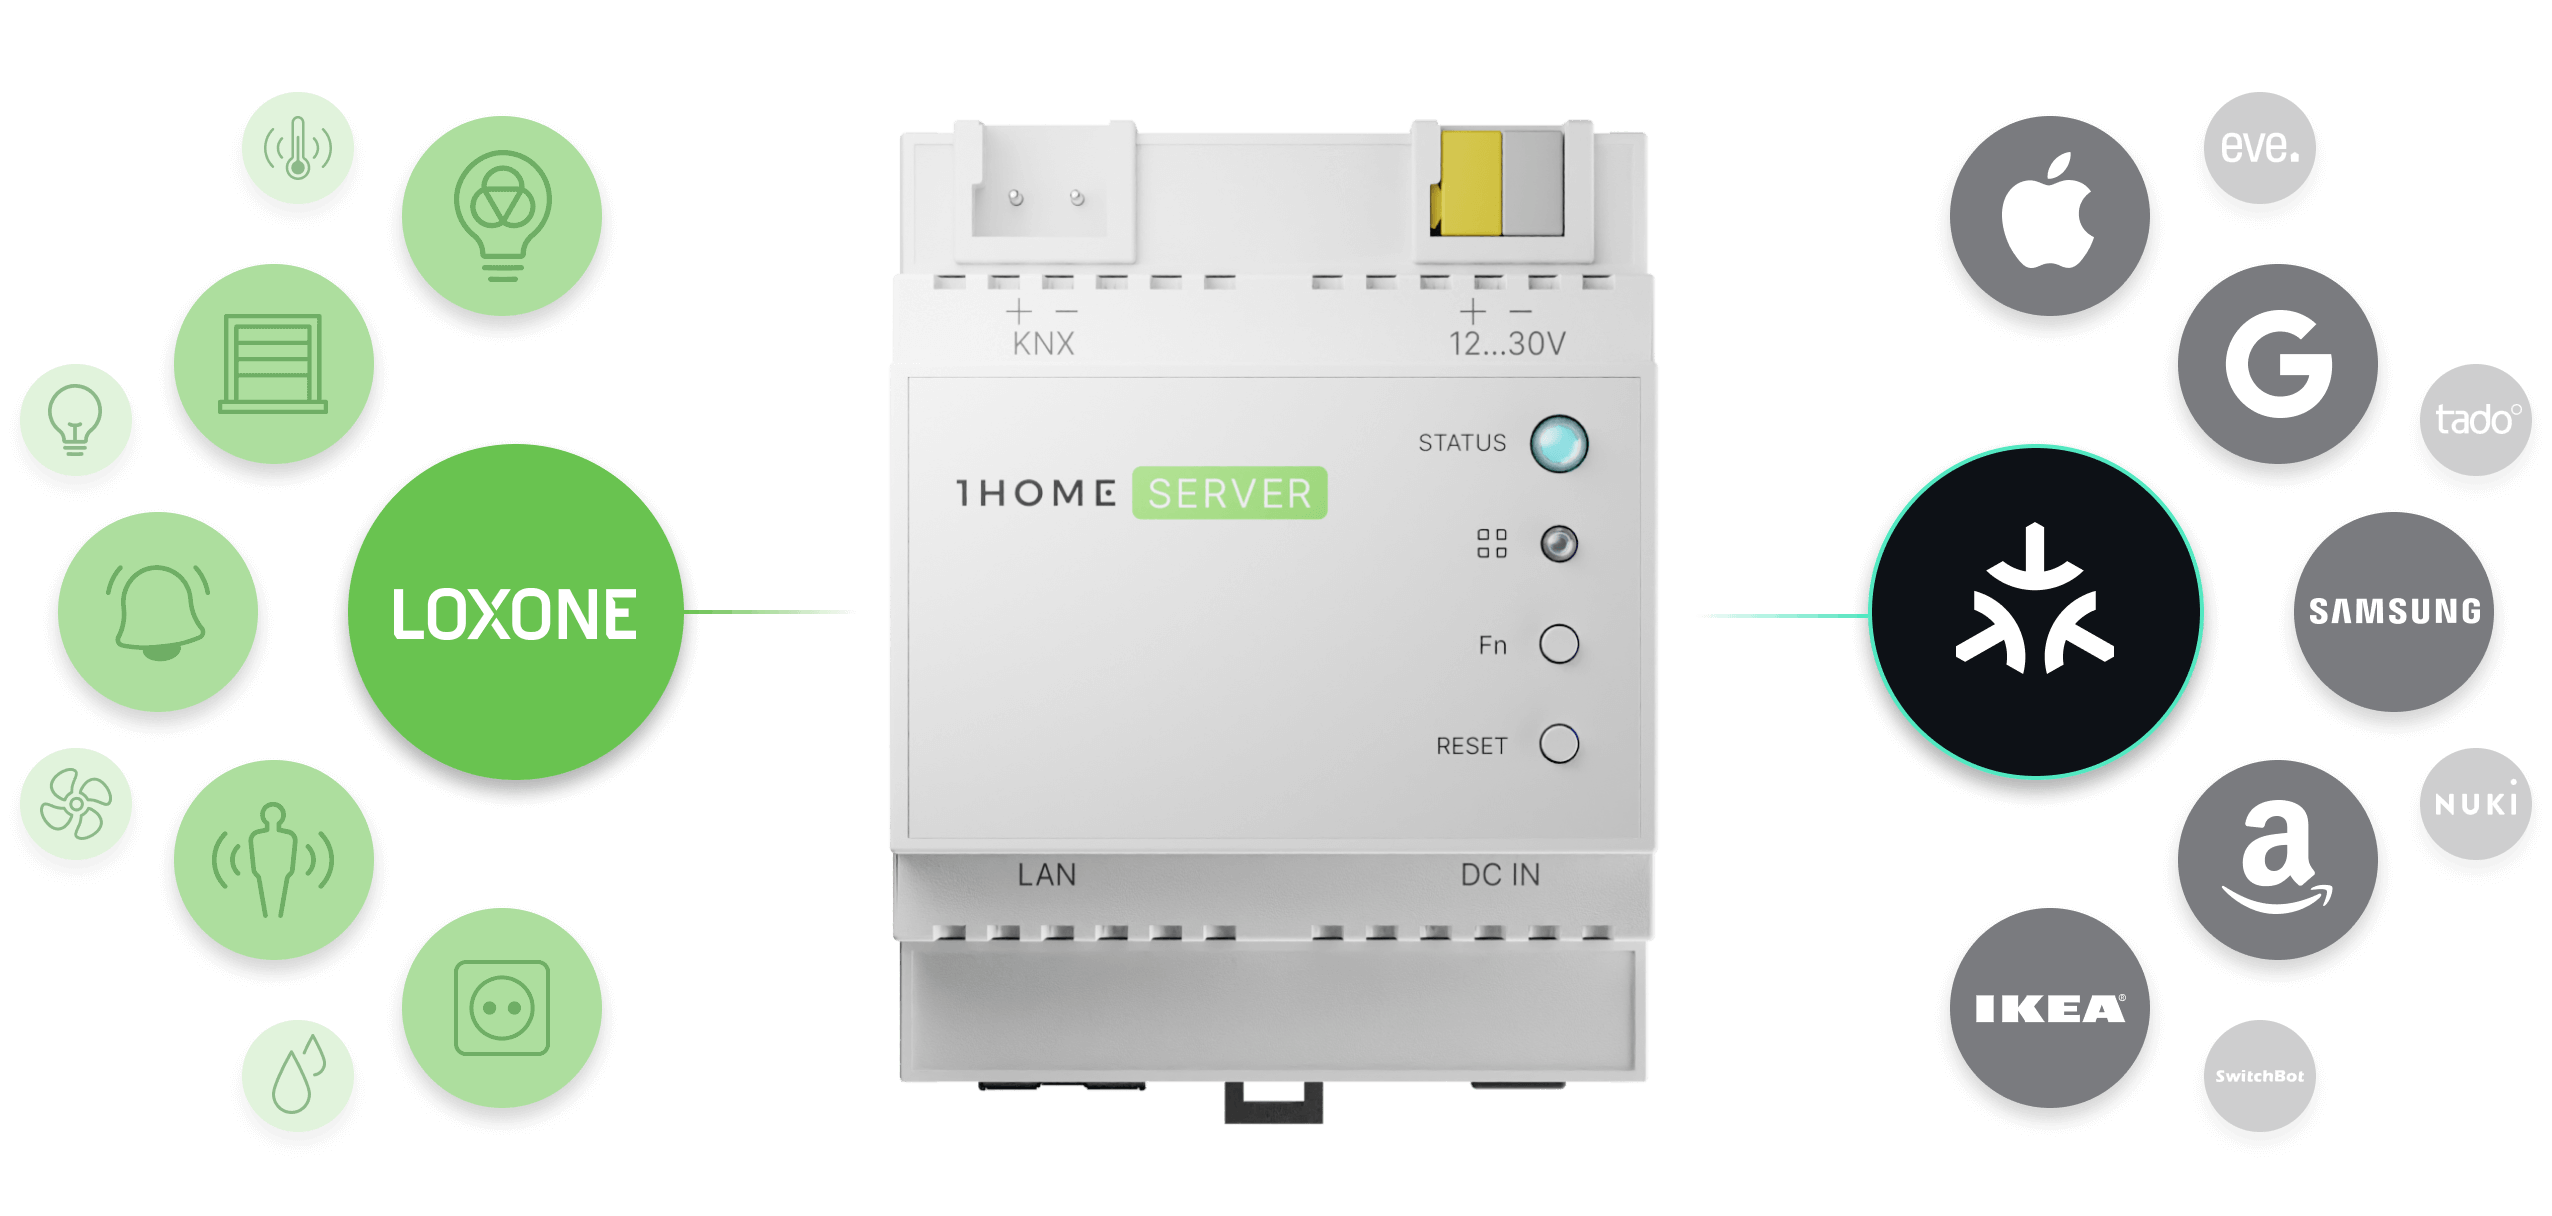 1Home device to control Loxone & Matter